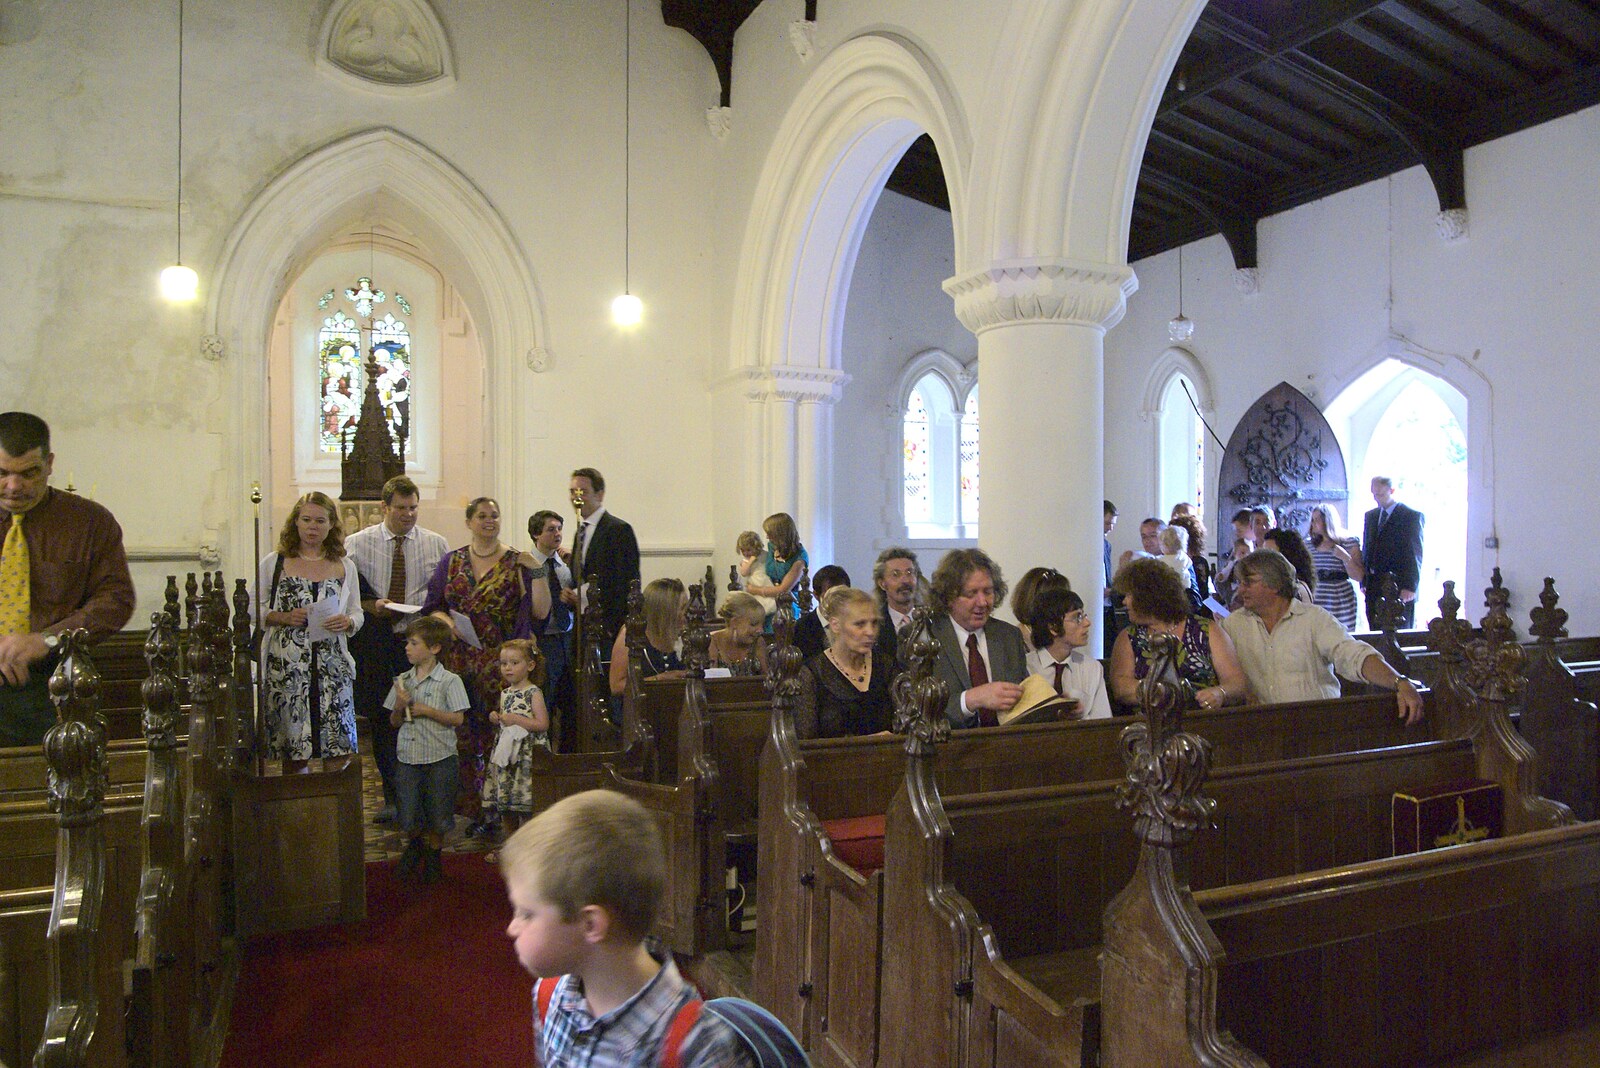 The crowds filter in from Nosher and Isobel's Wedding, Brome, Suffolk - 3rd July 2010